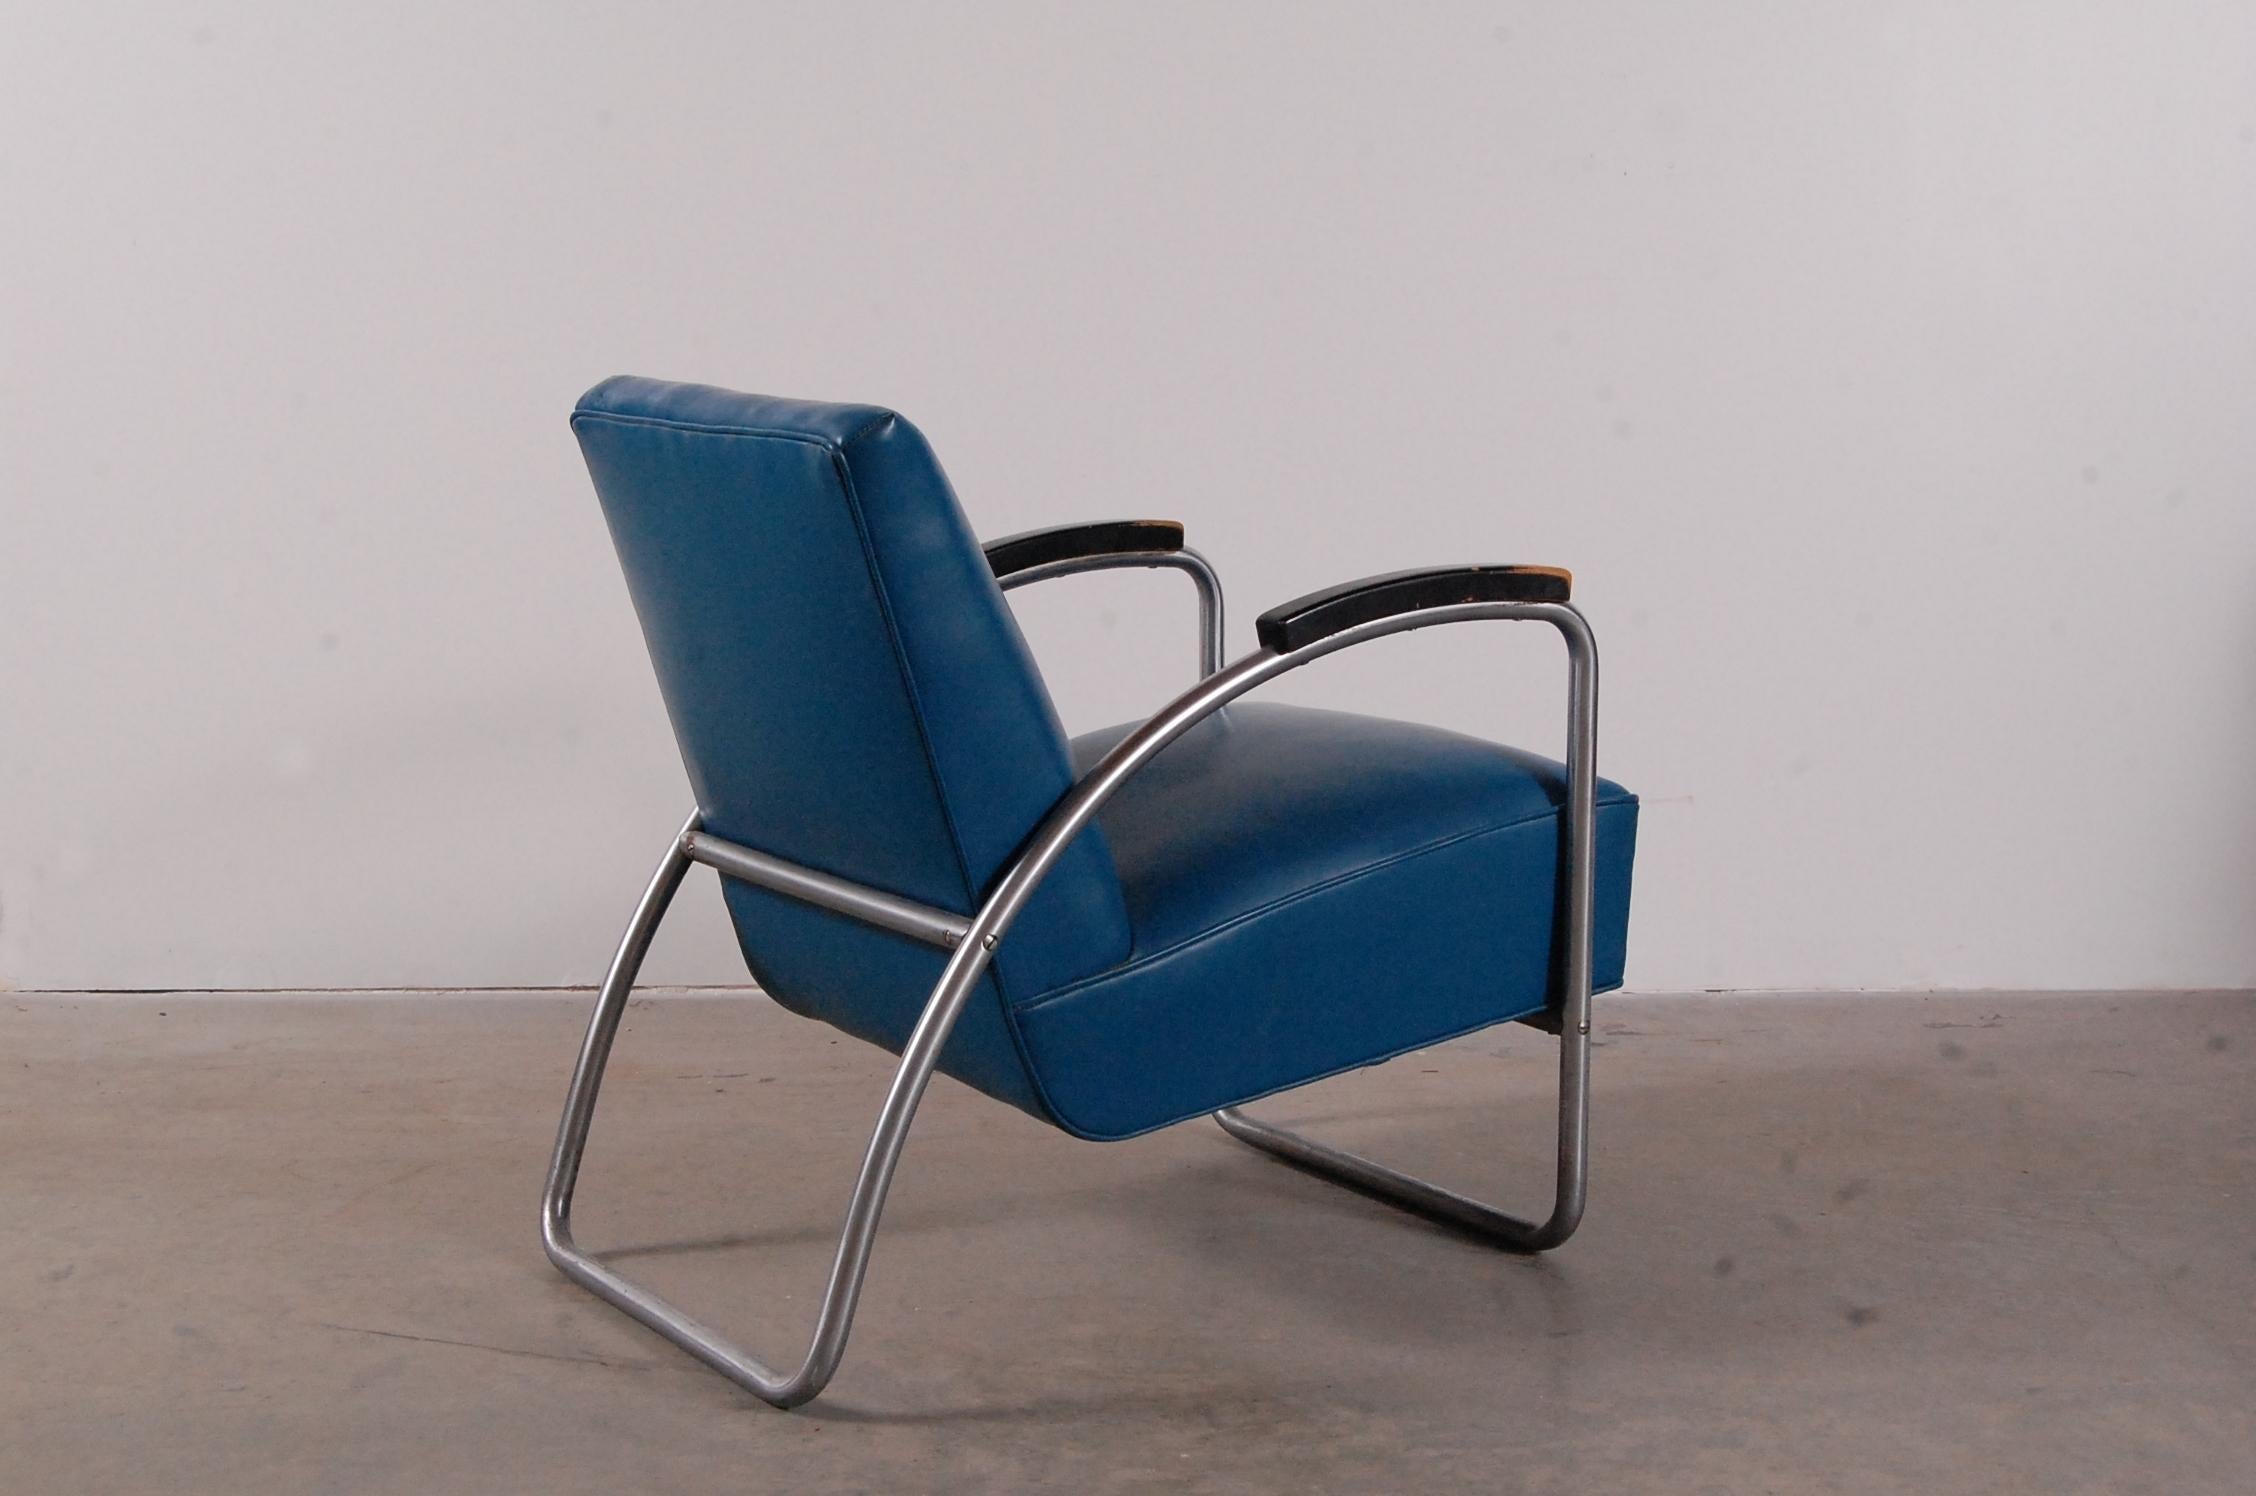 American Thonet Lounge Chair from the PSFS building in Philadelphia